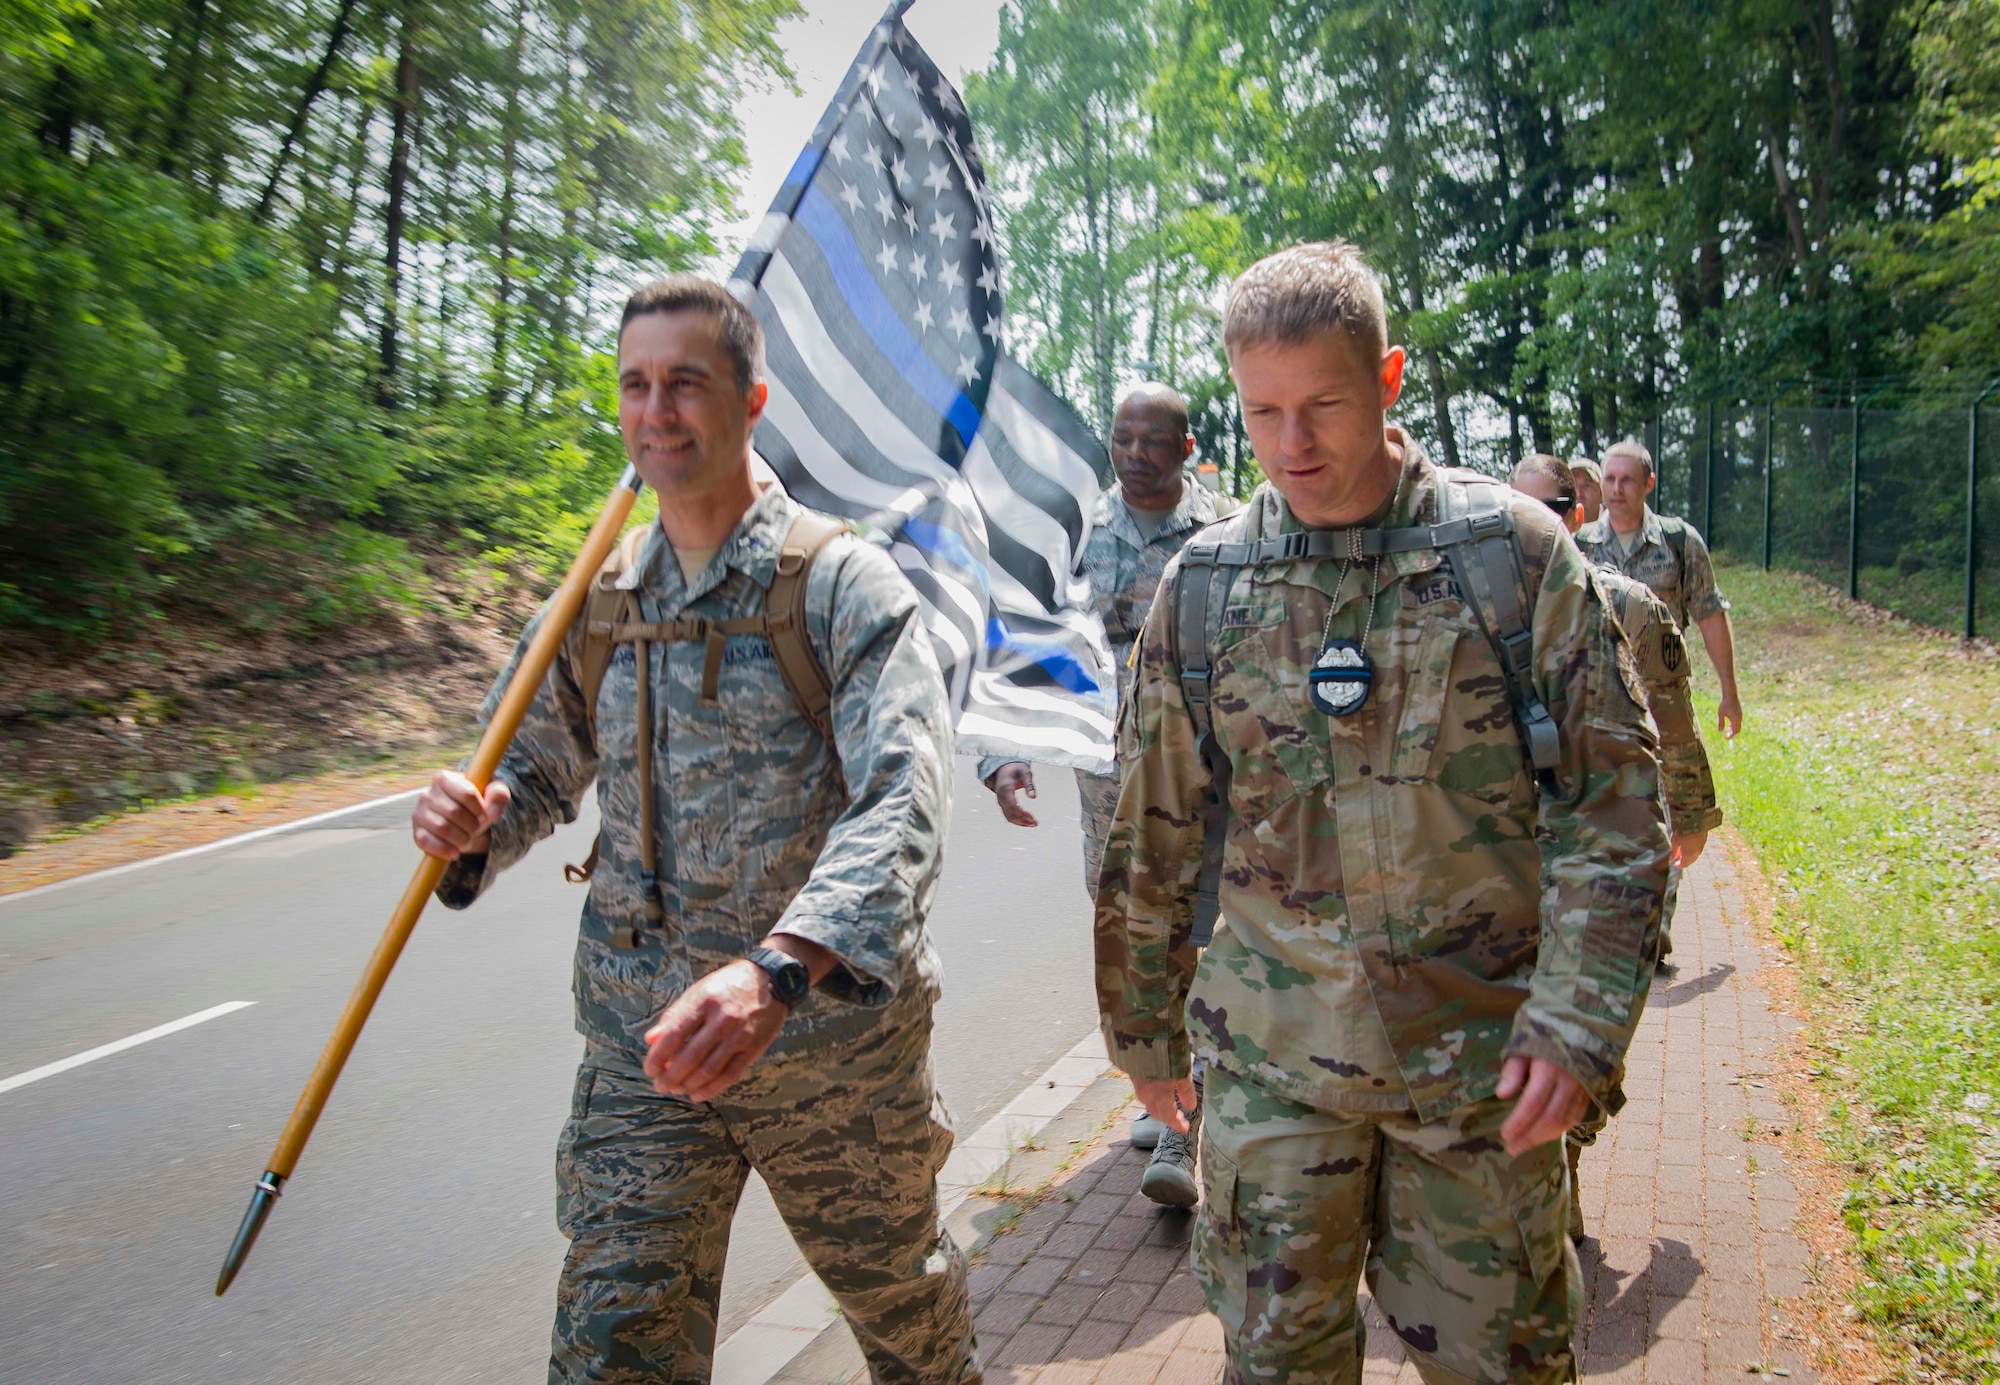 Kaiserslautern Military Community service members take part in a 24-hour ruck march while bearing the Thin Blue Line Flag on Vogelweh Air Station, Germany, May 17, 2018. The Thin Blue Line Flag honors police officers; the black background represents the fallen, and the blue line represents the protective barrier that police officers uphold against danger.